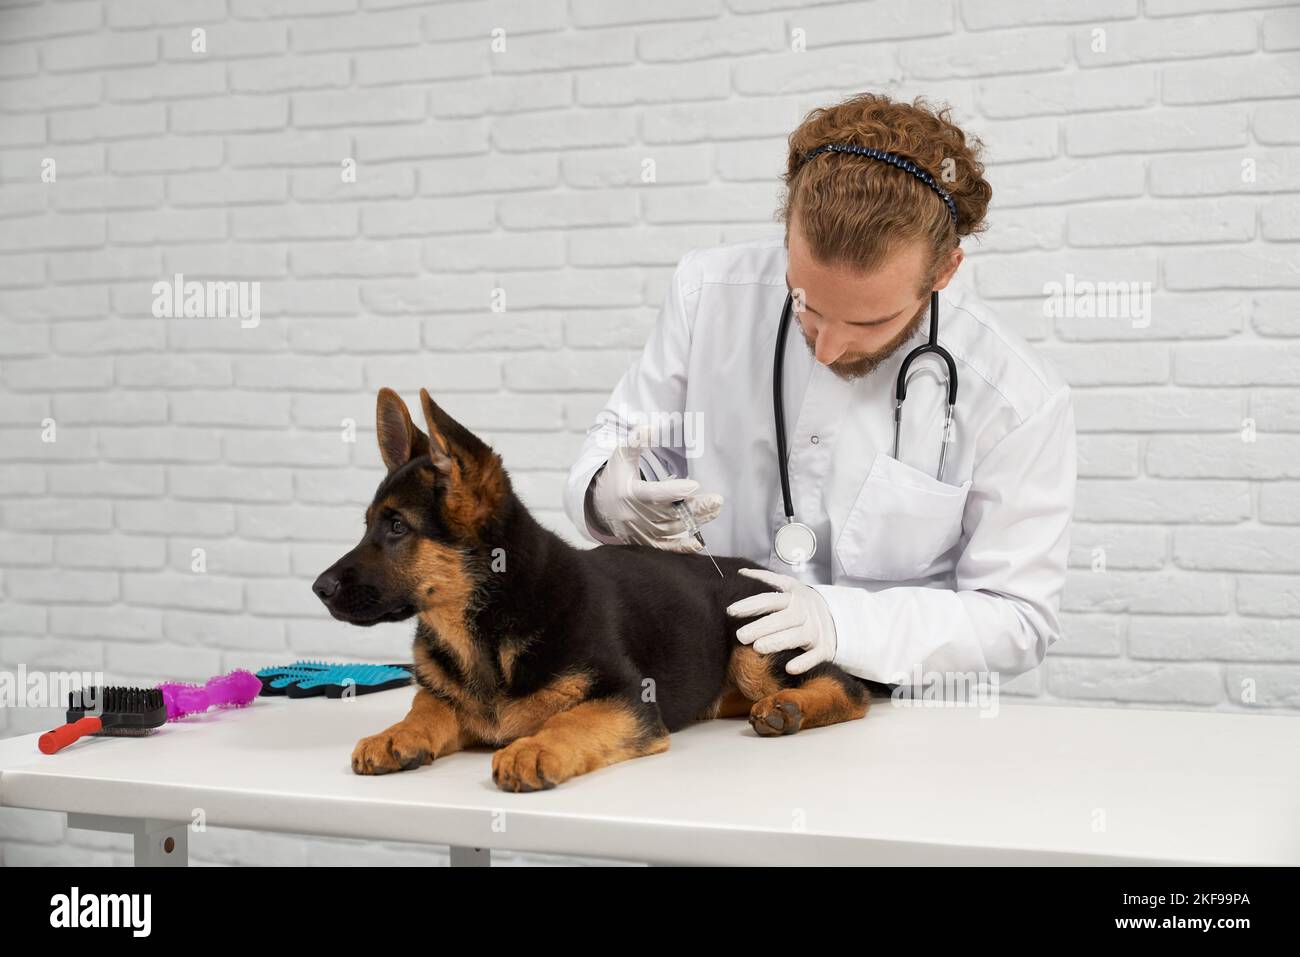 Portrait of fair haired veterinarian and brown and black patient. Animal doctor firmly holding dog hip and finding place for injection. Visit to the veterinary coming to end successfully.  Stock Photo